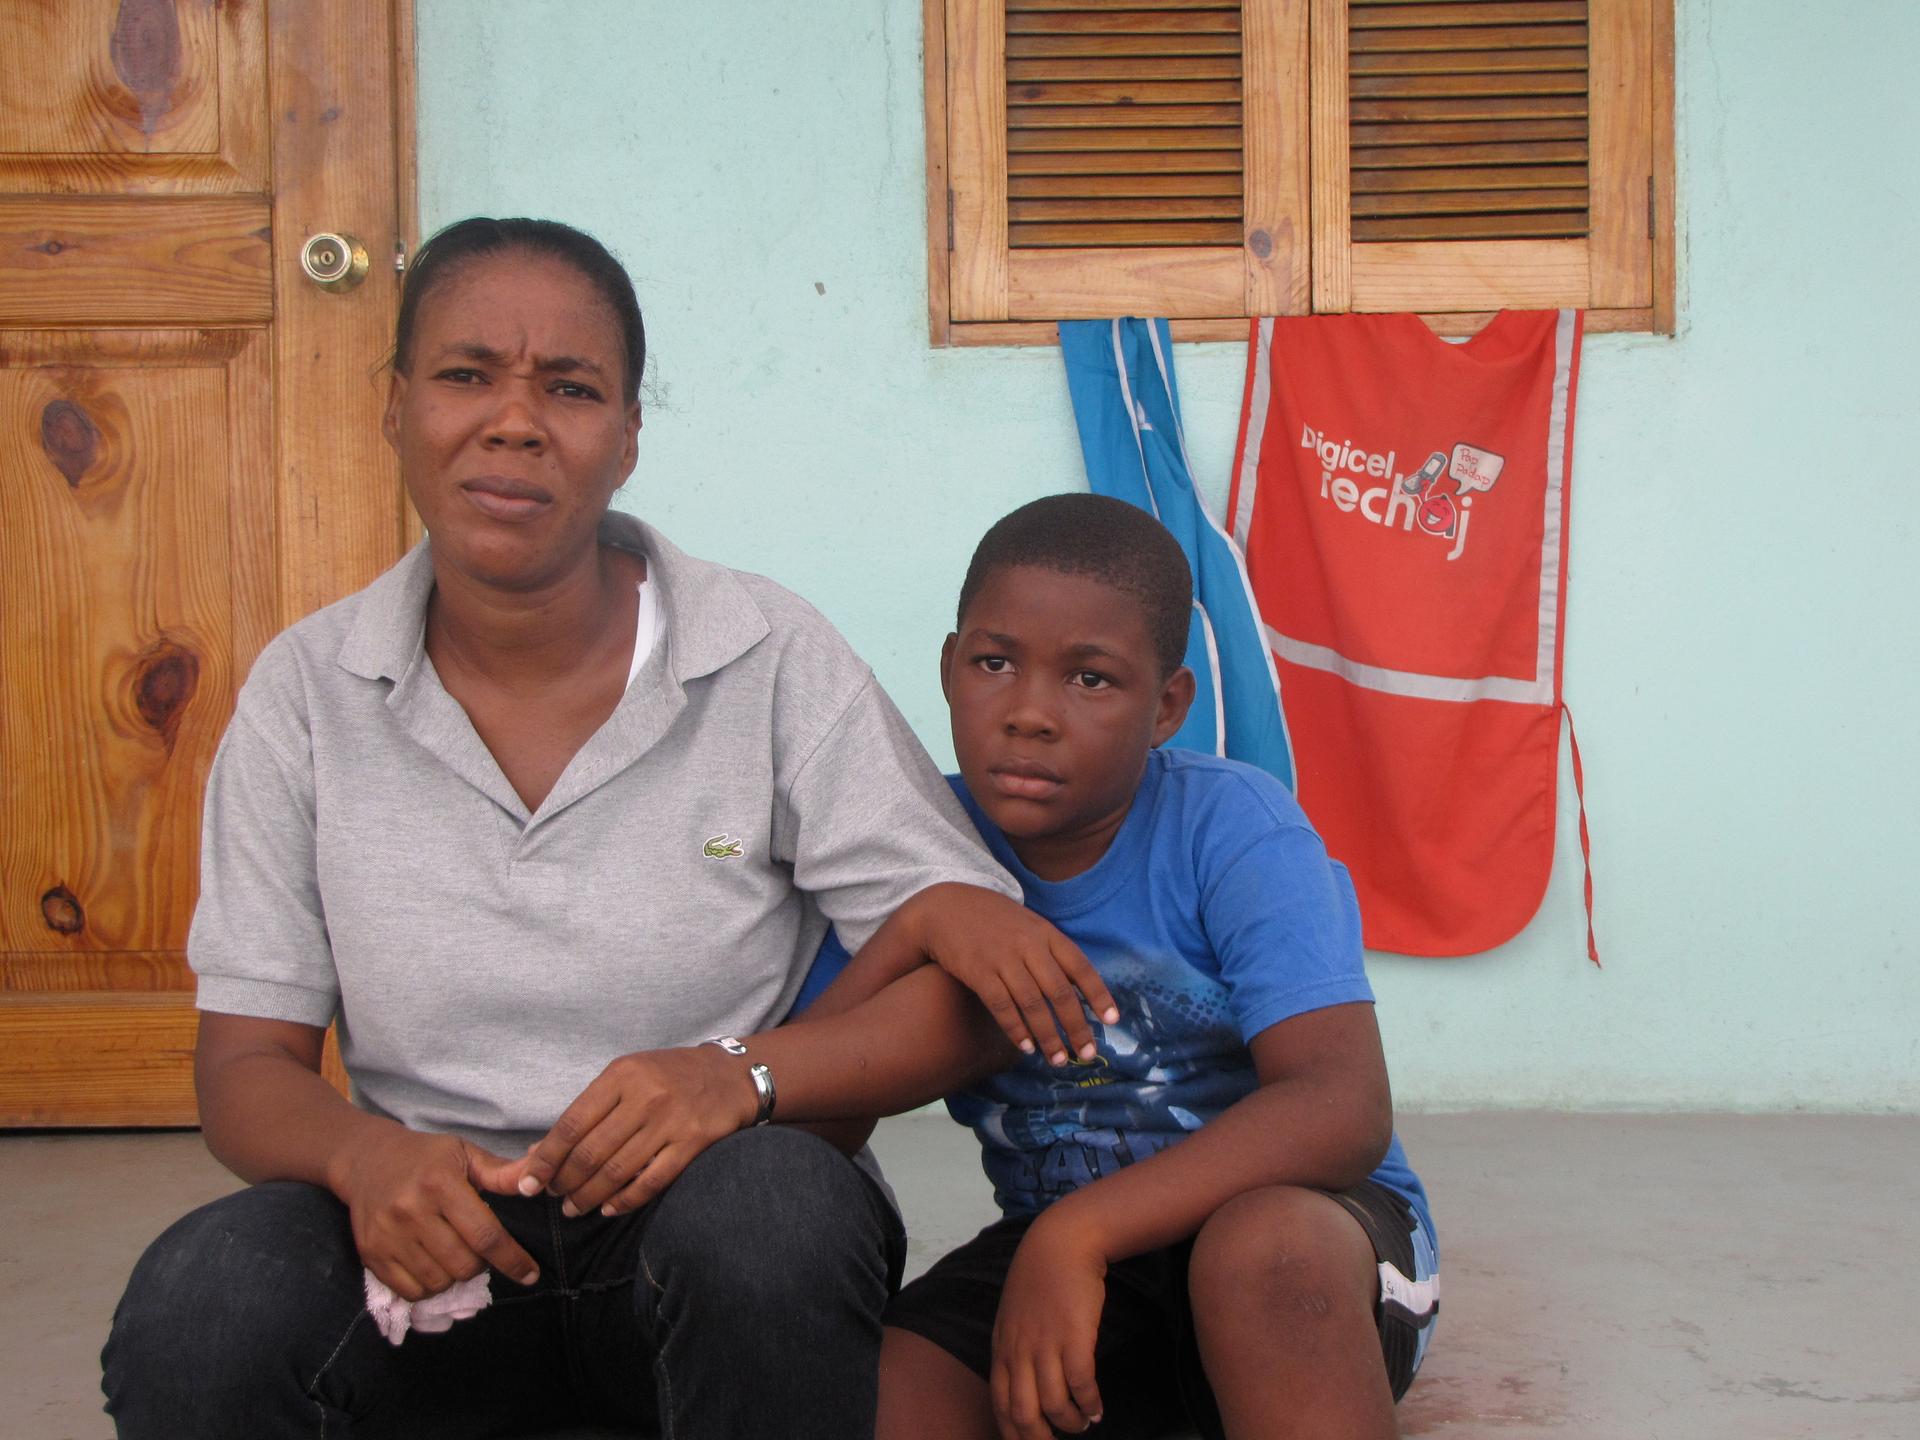 Marie Conce Moreau with her son outside their home in Village la Difference. Moreau took a job at the nearby industrial park when her husband lost his job. They also make ends meet by donning the blue and red aprons to sell phone cards.